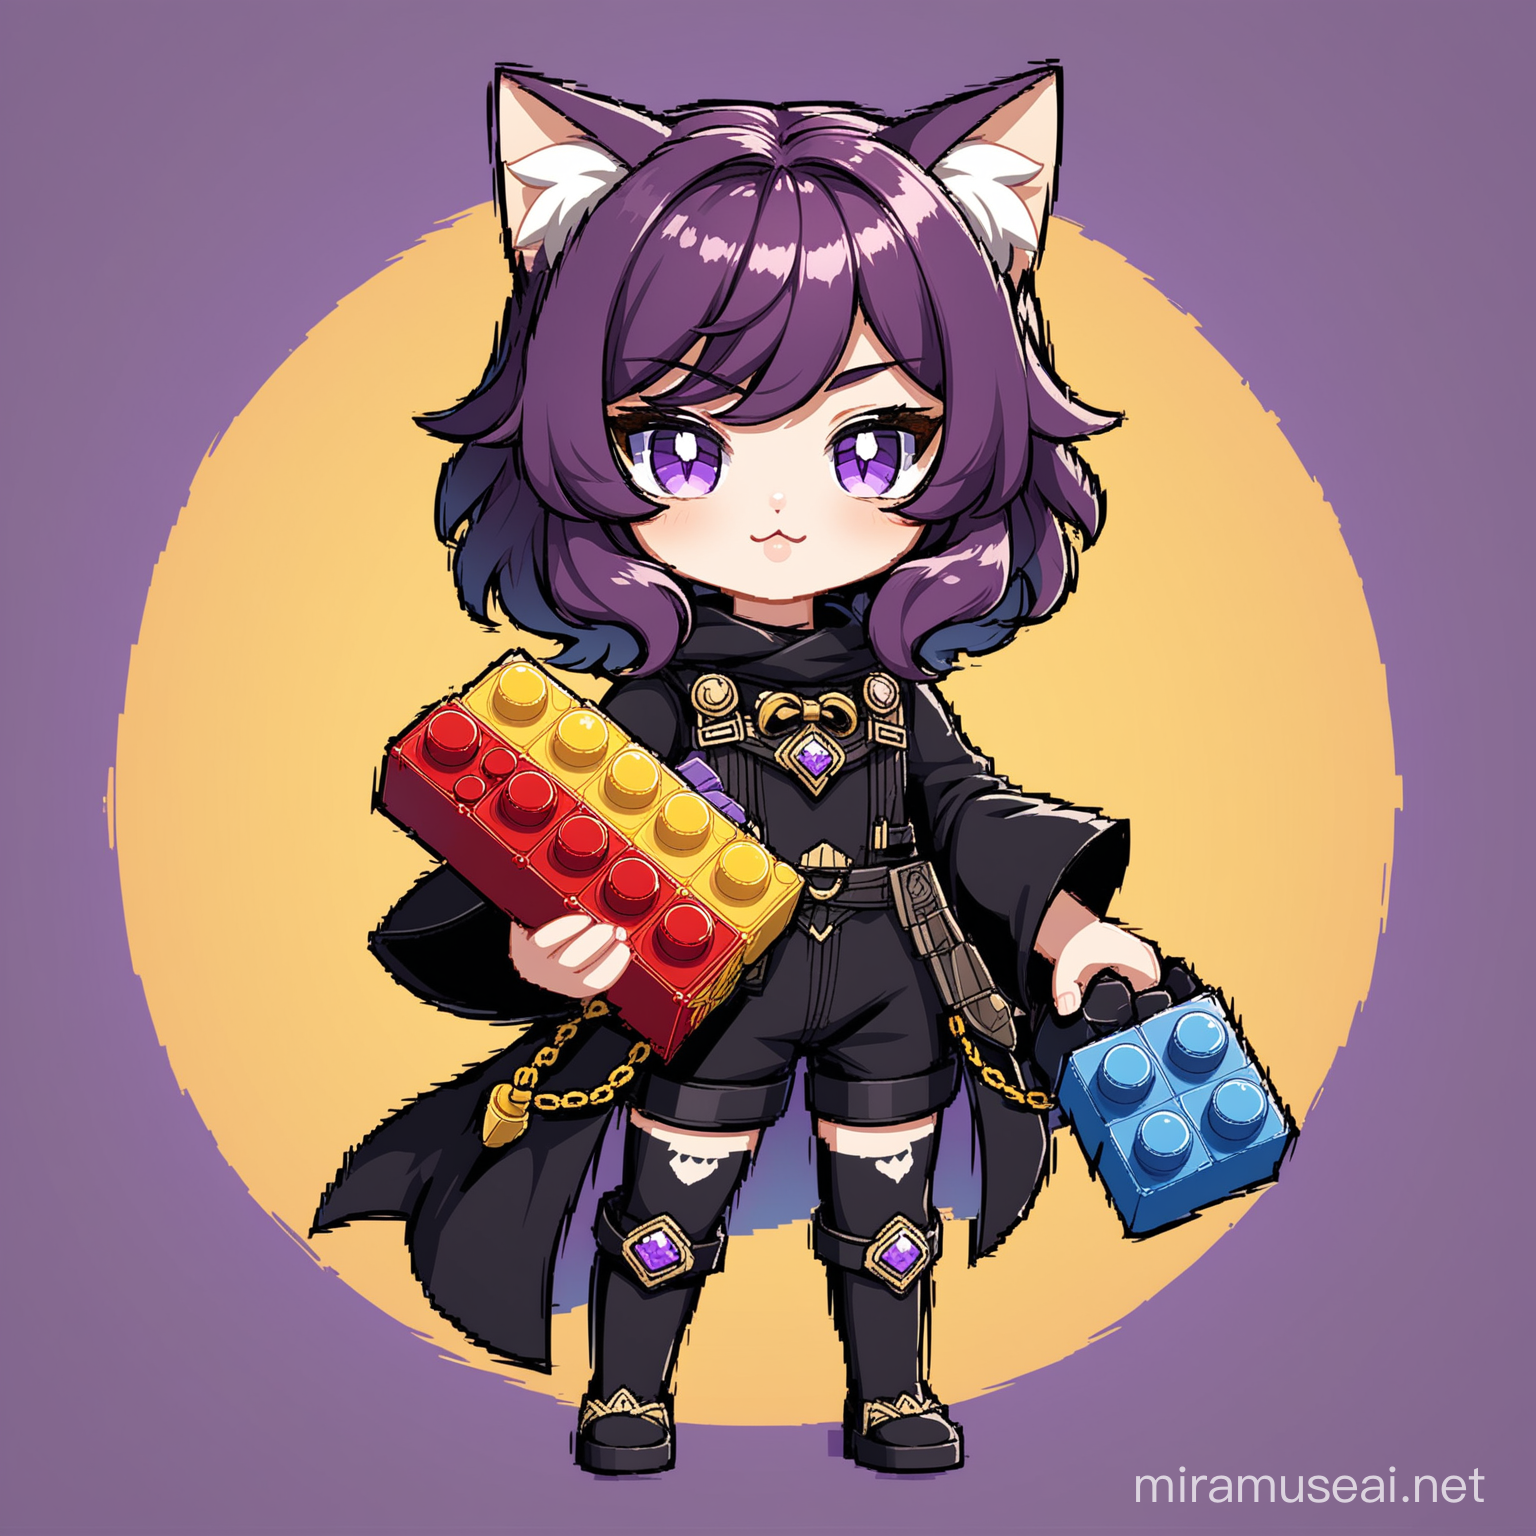 PurpleHaired Cat Girl Holding Lego in GenshinStyle Attire